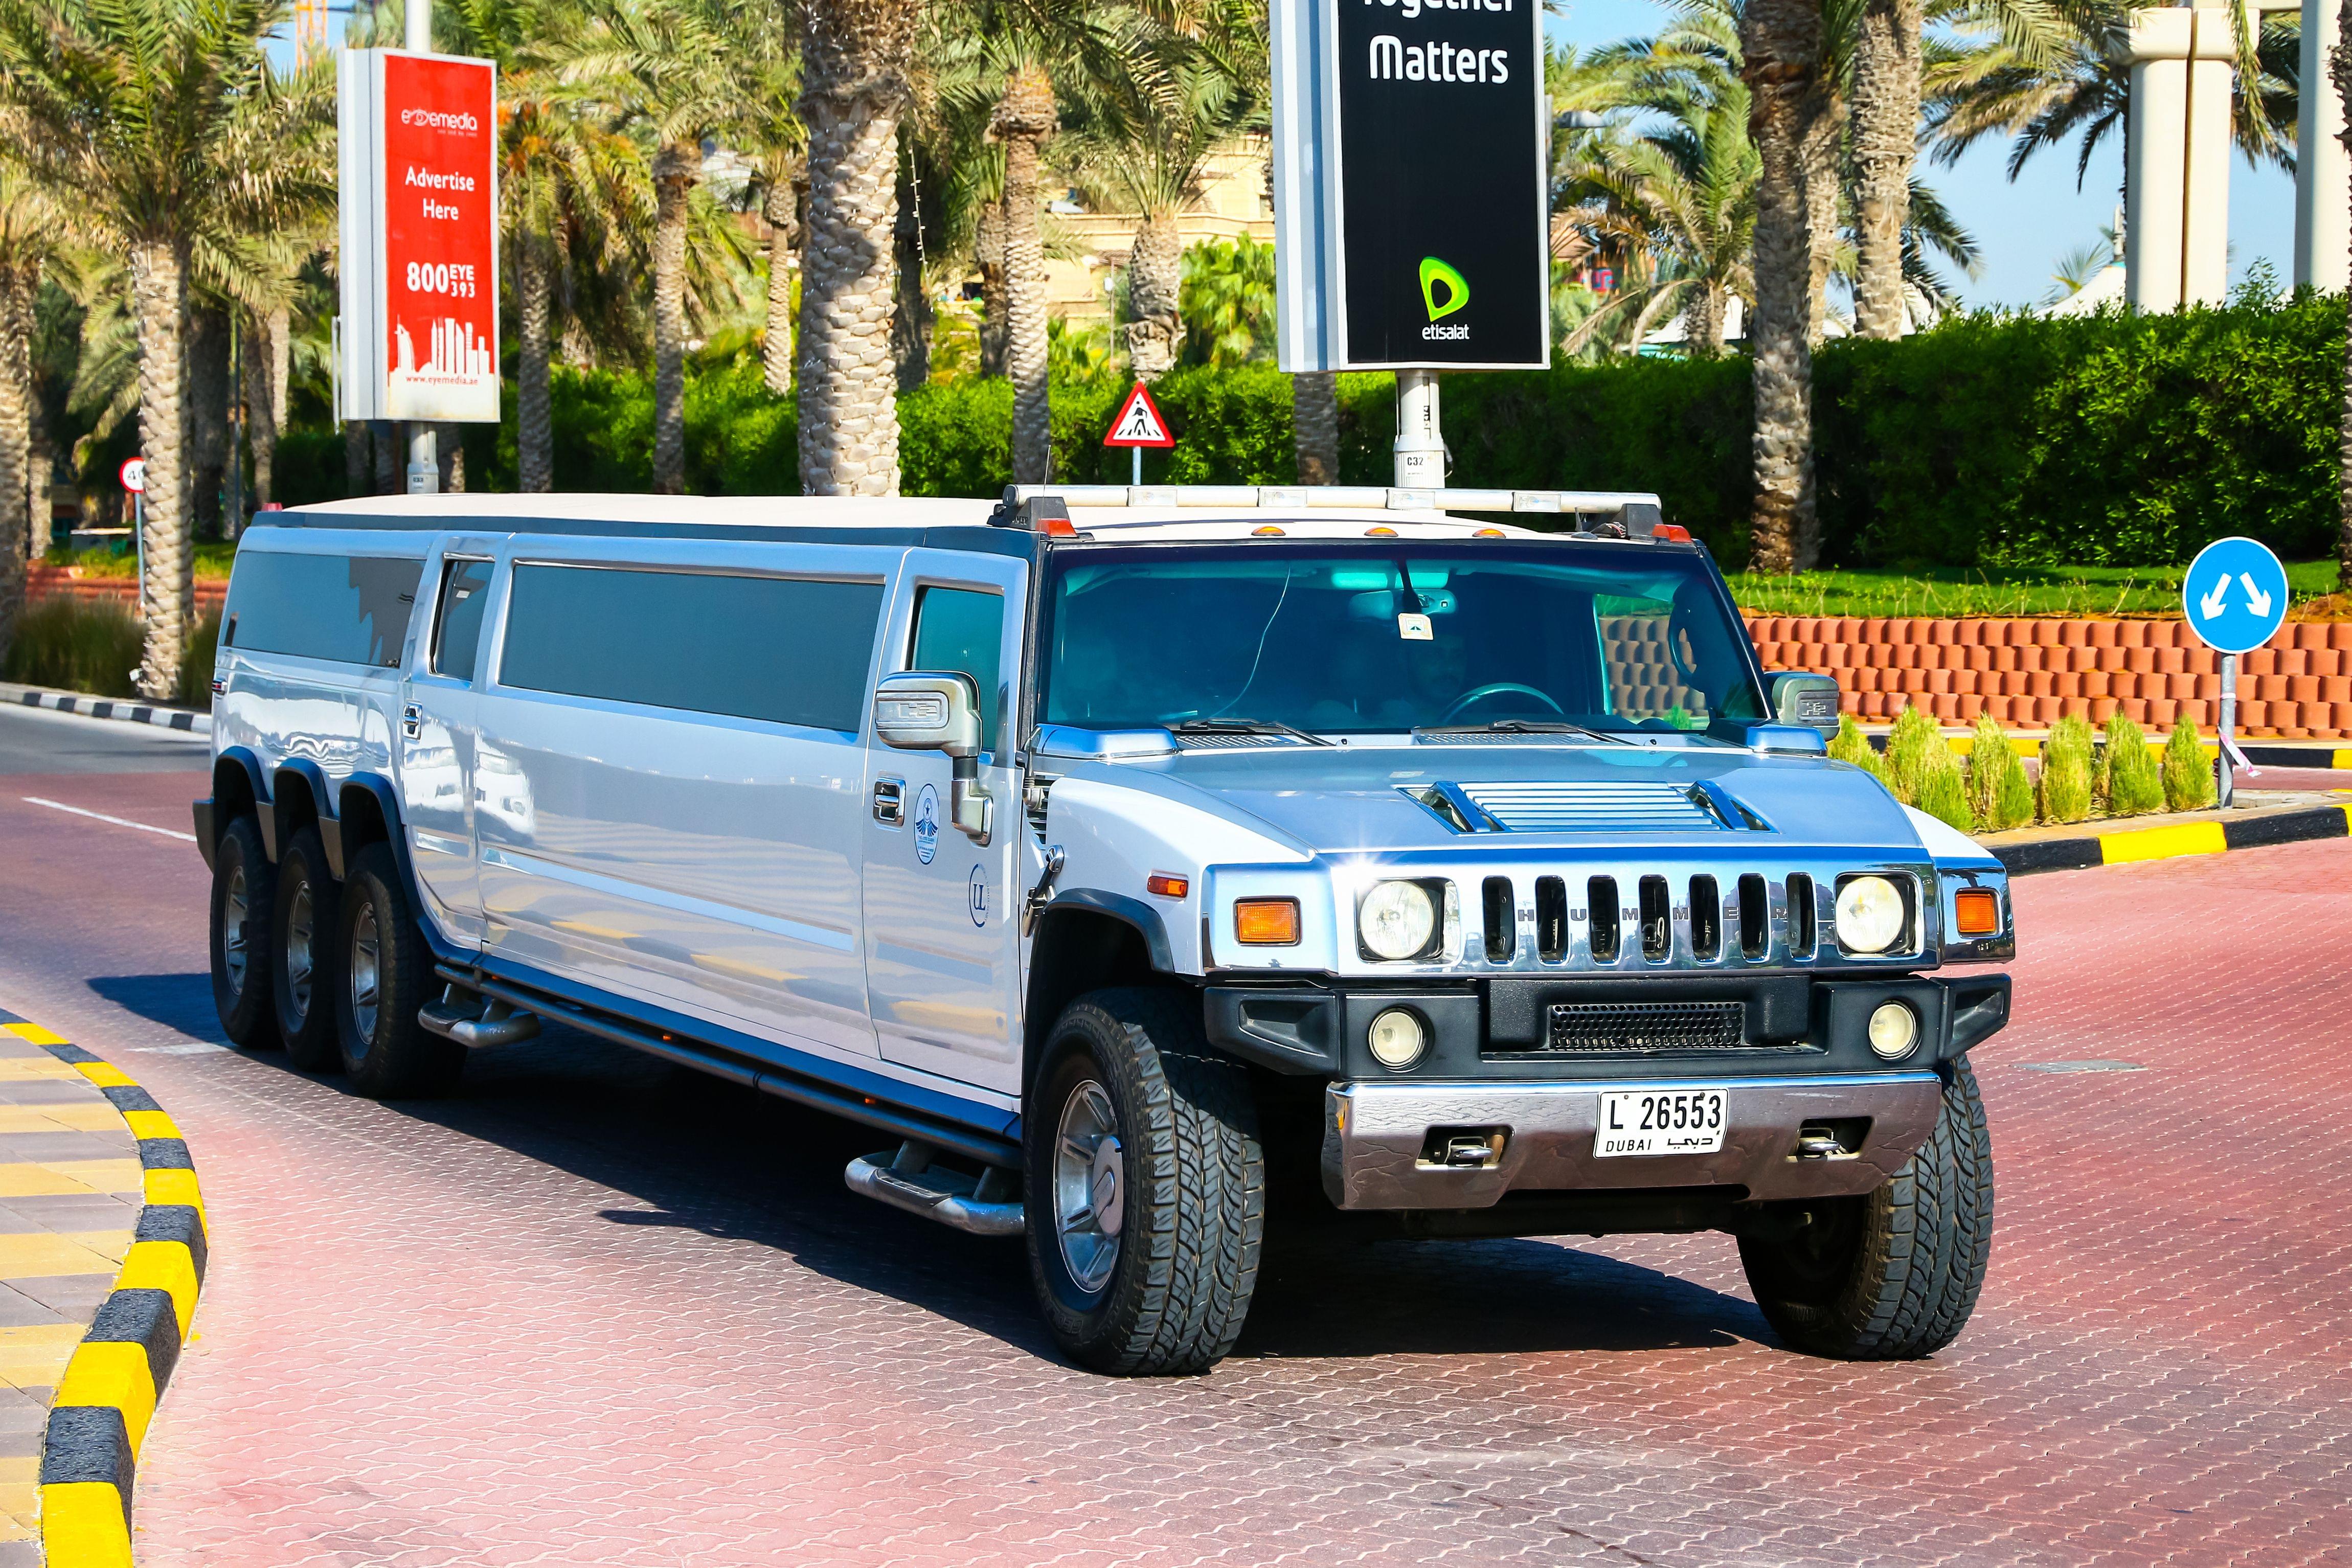 Reasons to Book Limousine with Us